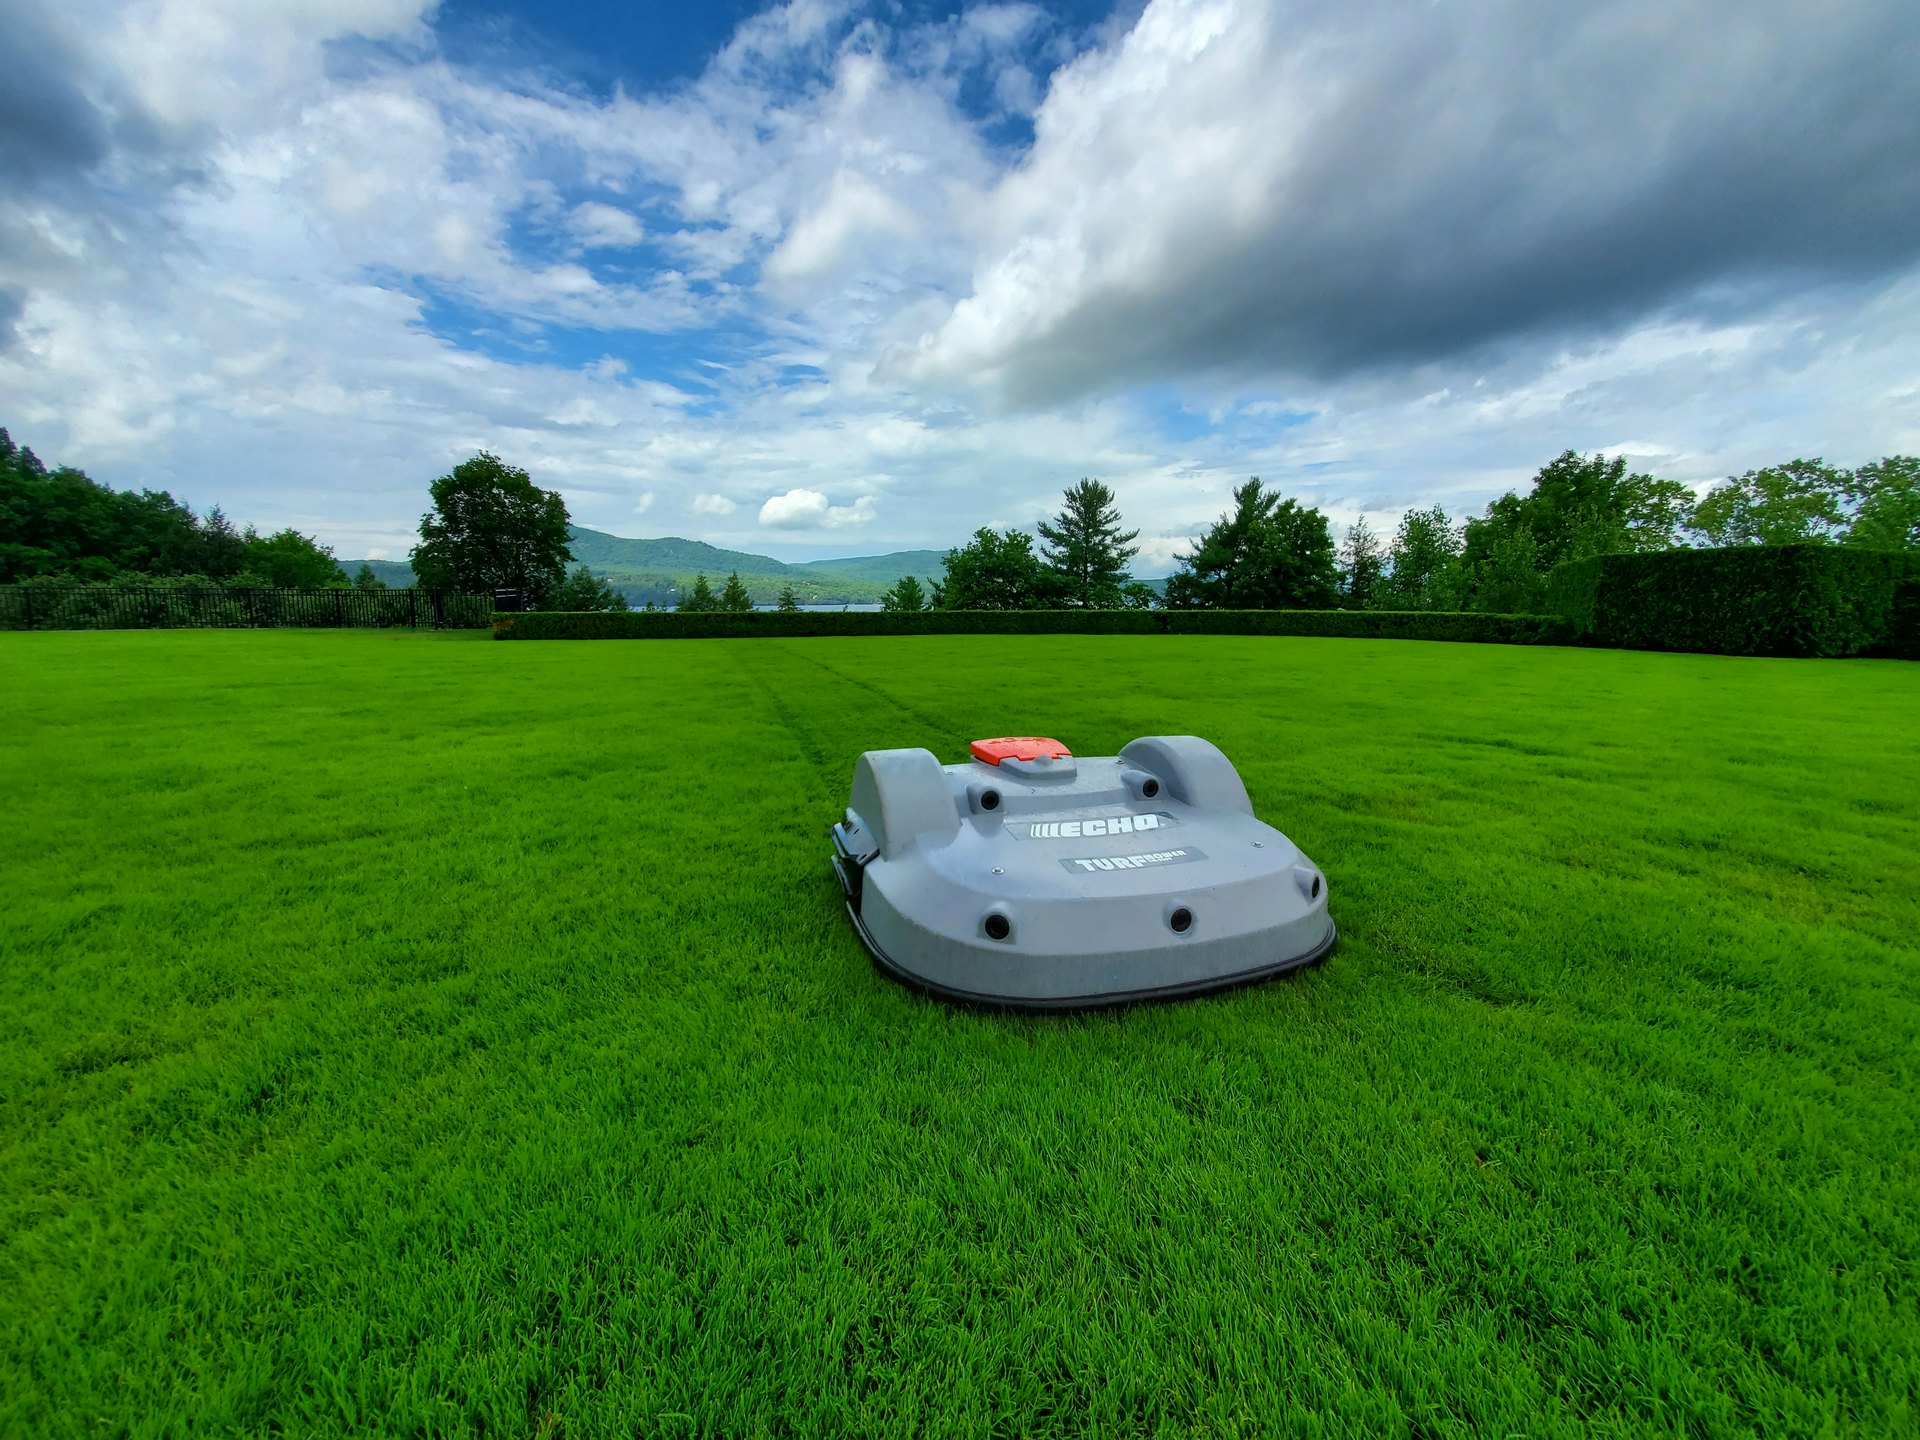 Robotic mower help landscape companies perform more work with fewer employees.